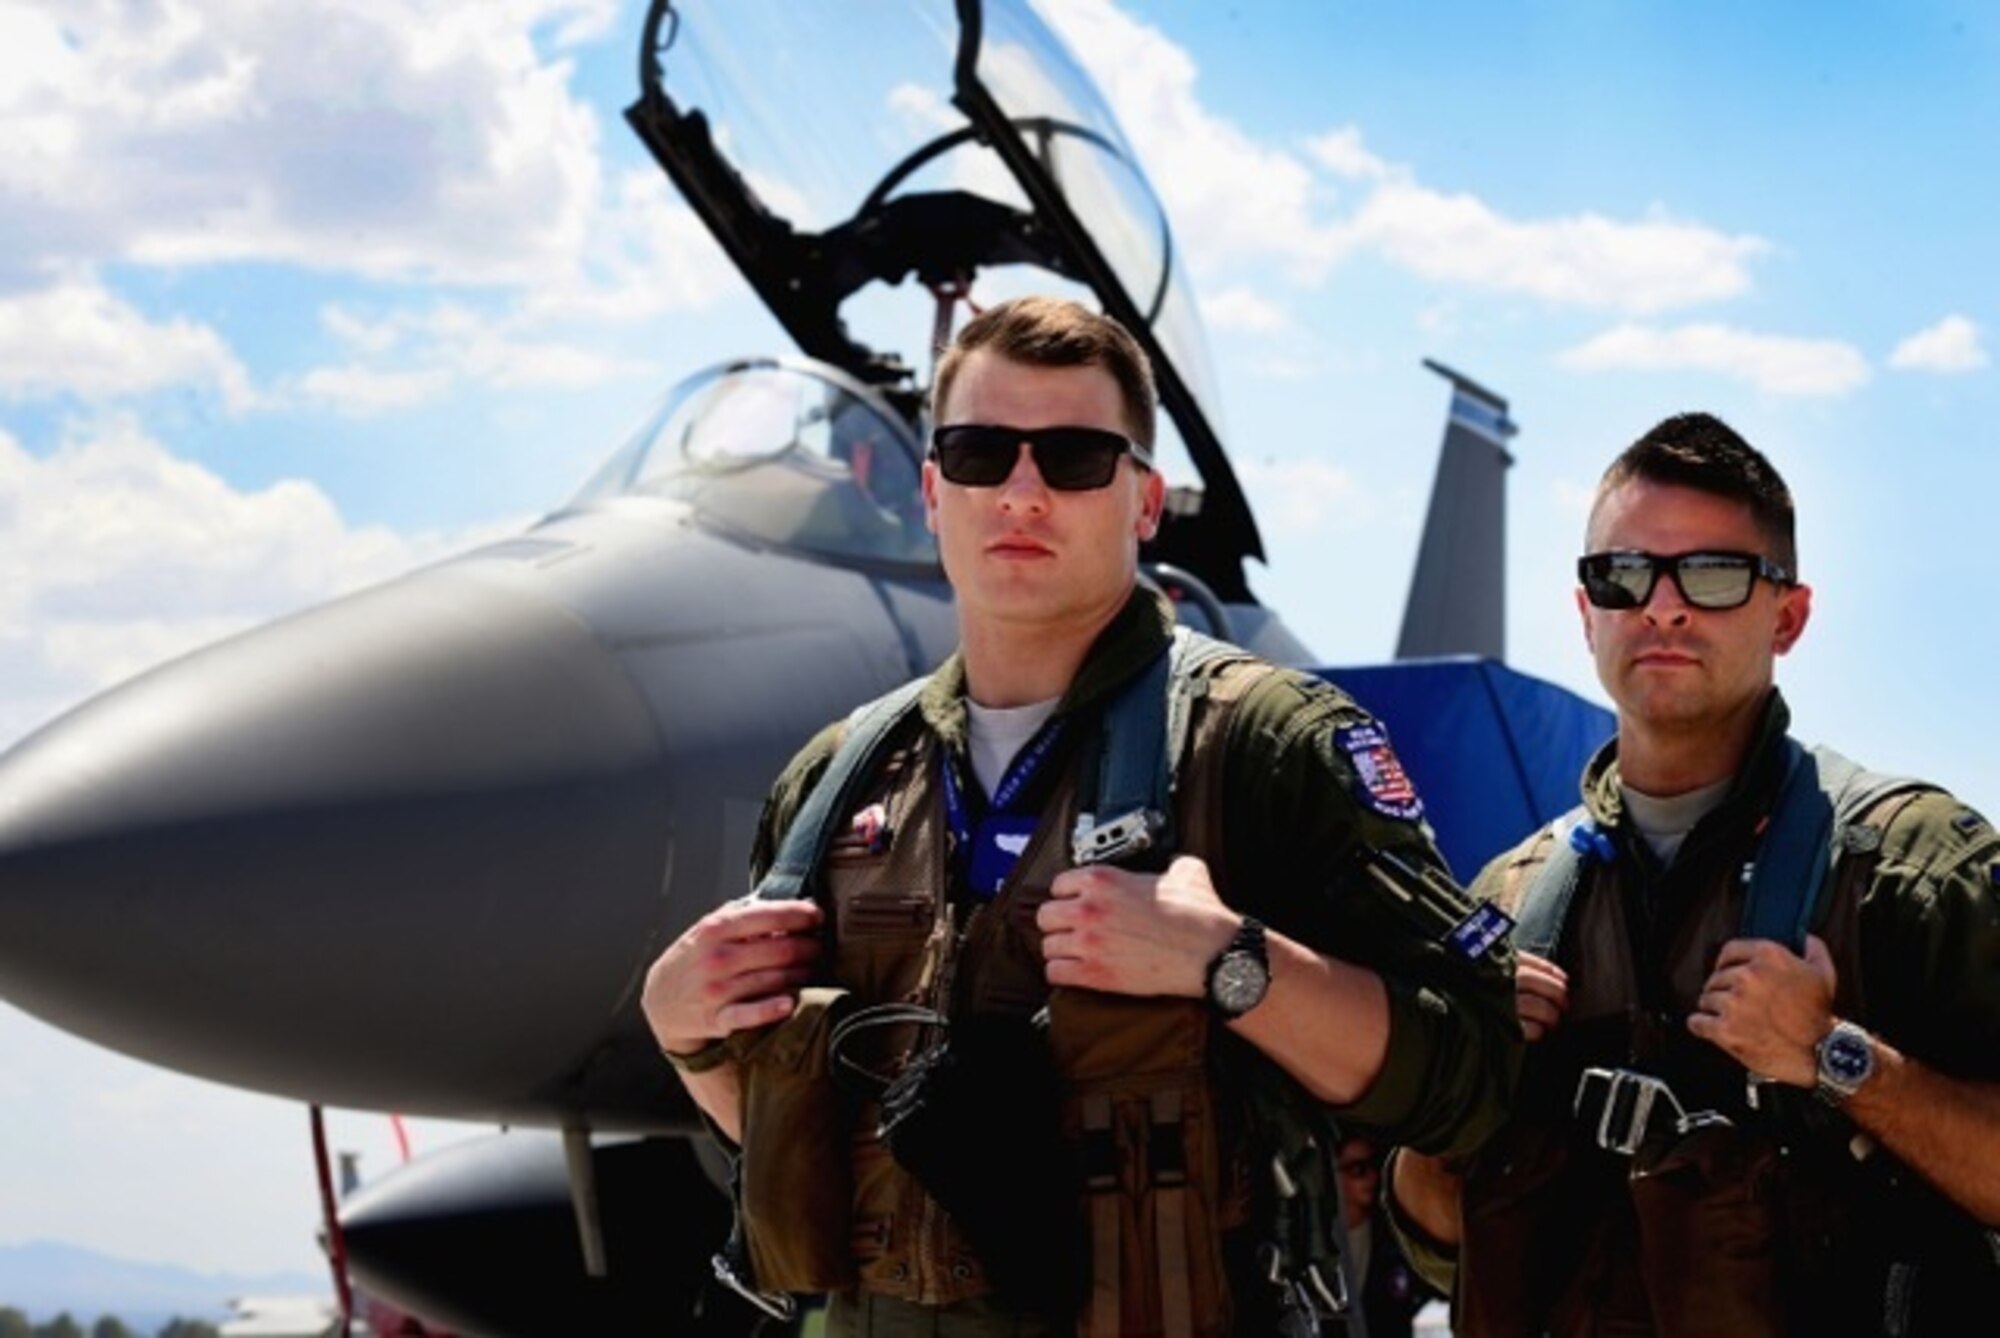 U.S. Air Force 1st Lieutenant Drew Lyons, 492nd Fighter Squadron, F-15E Strike Eagle pilot, and 1st Lieutenant J. Paul Reasner, 492nd FS, F-15E Strike Eagle weapon systems officer, gear up for a sortie in support of exercise Red Flag 16-4 at Nellis Air Force Base, Nevada Aug 17. Lyons and Reasner’s goal as first-time participants at Red Flag is to benefit from each training scenario and become better wingmen for their squadron. (U.S. Air Force photo/ Tech. Sgt. Matthew Plew)